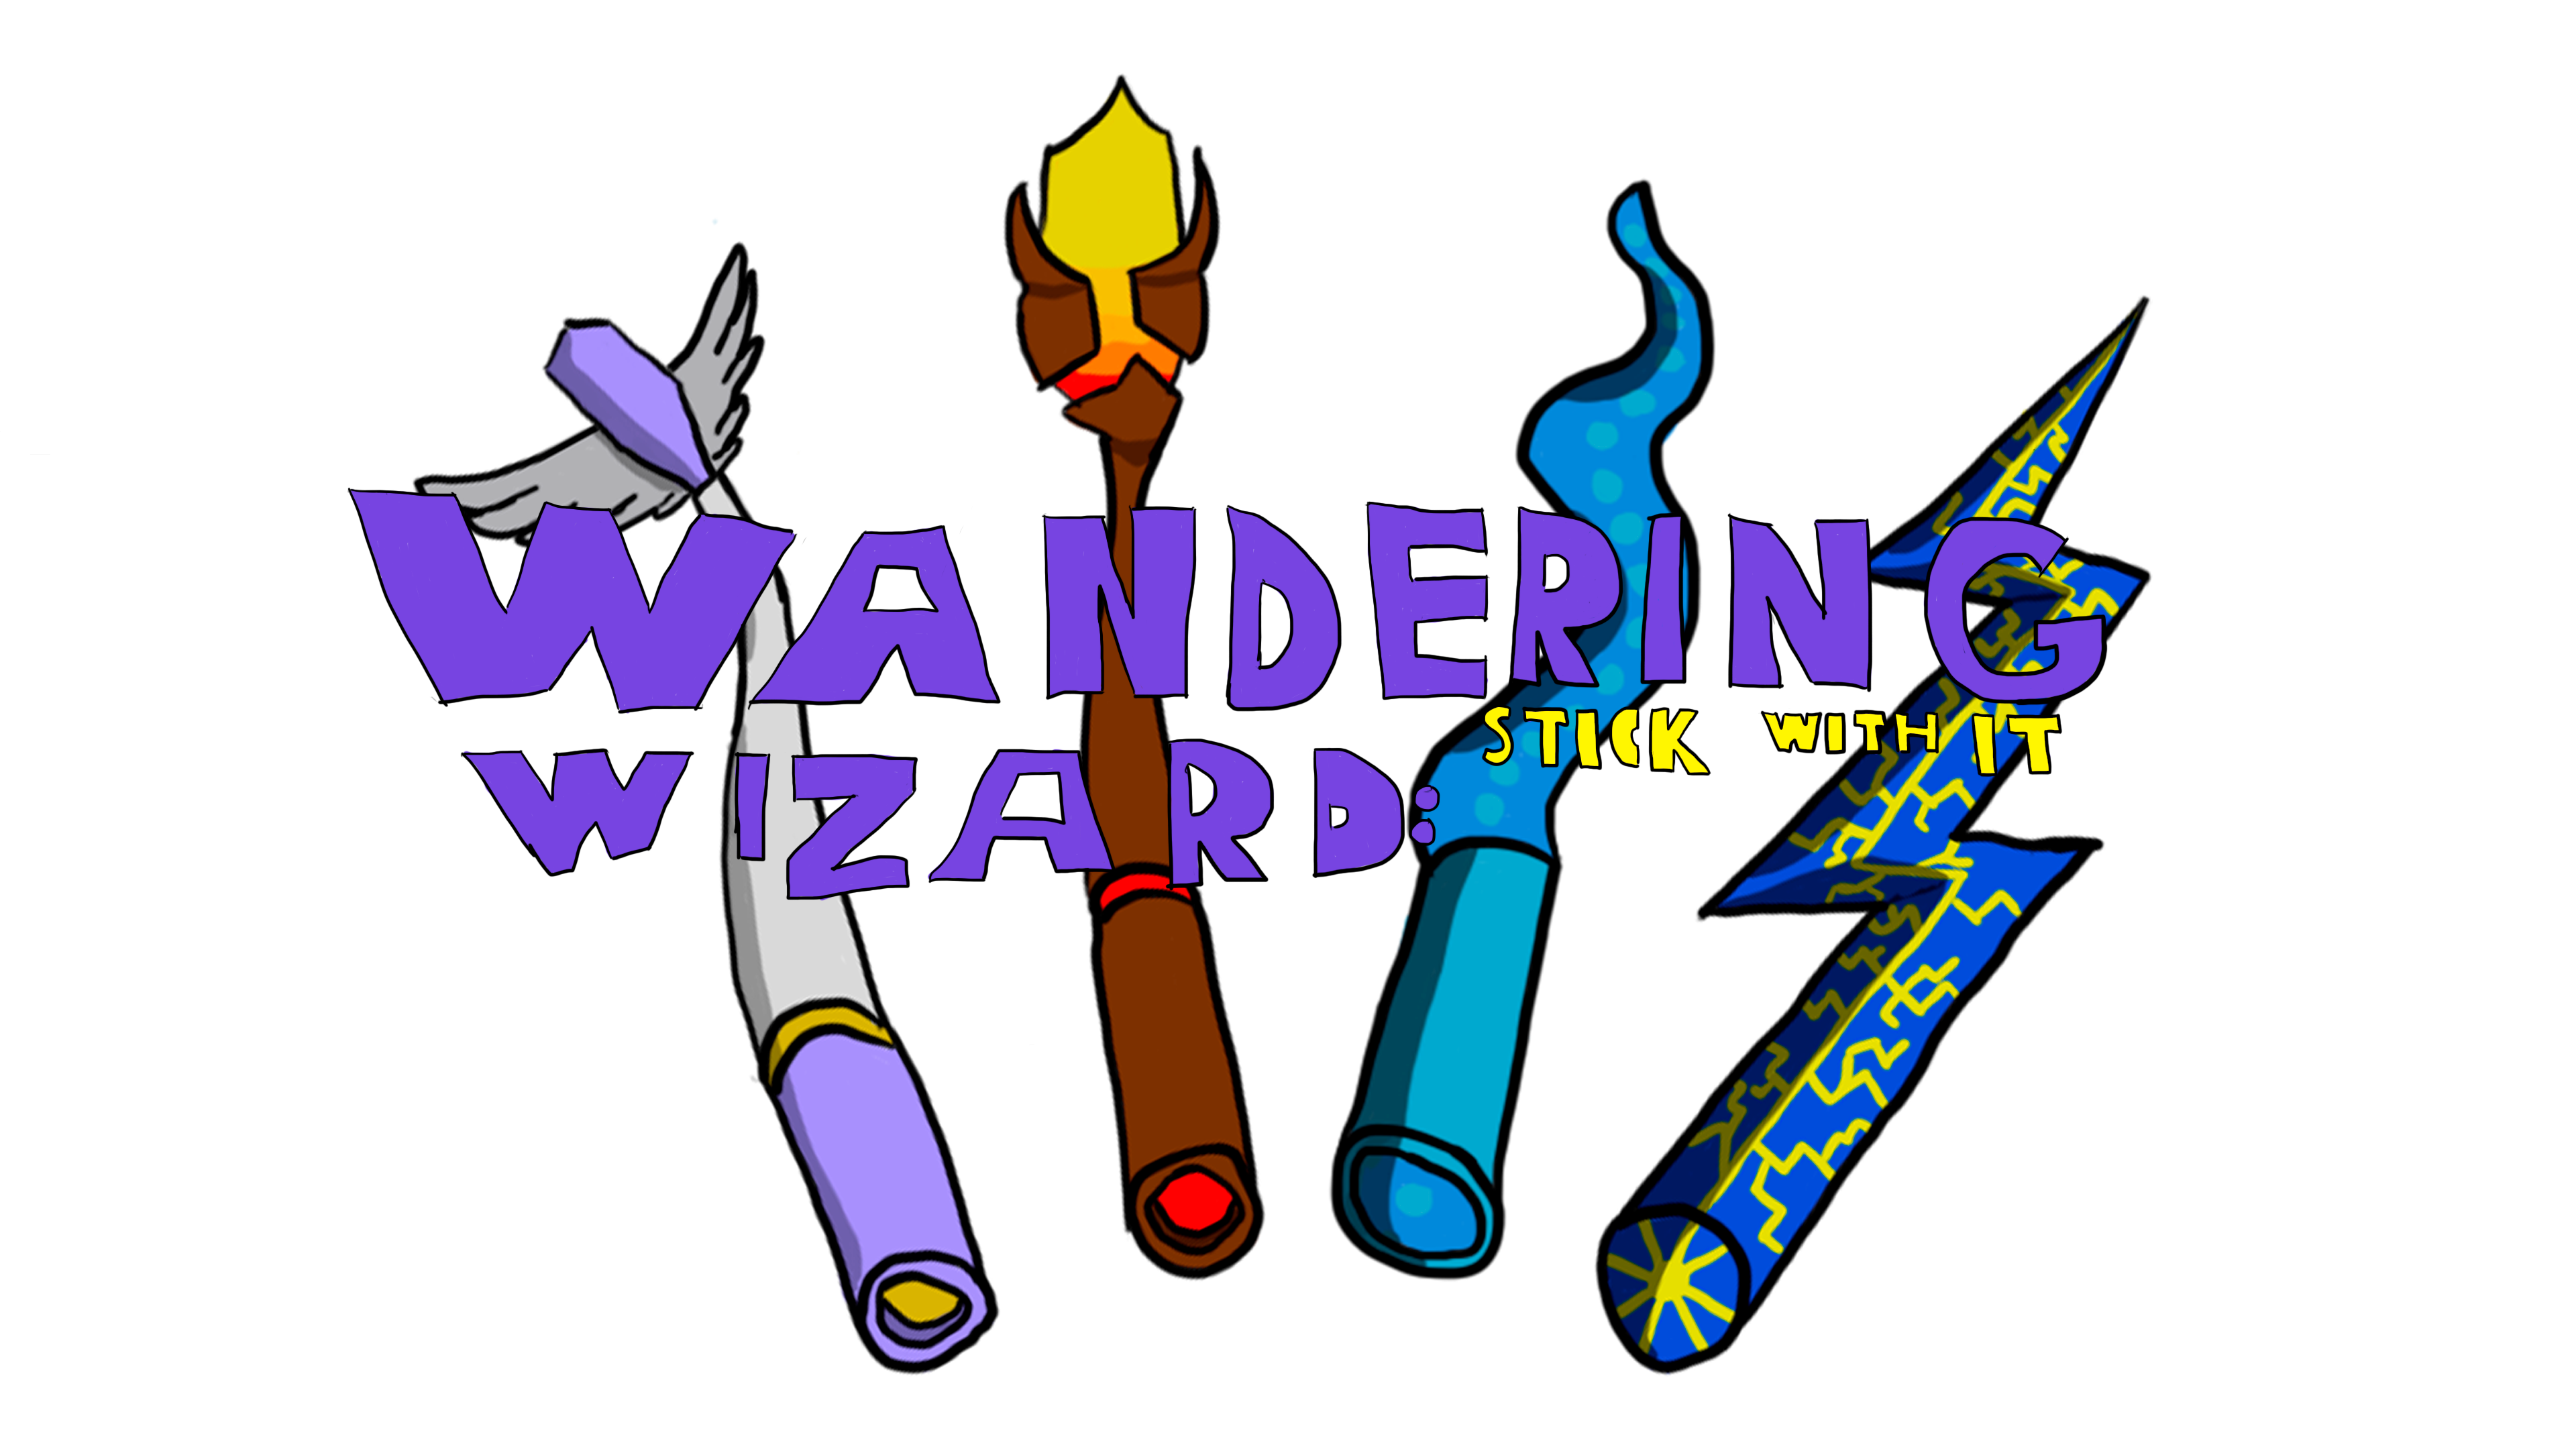 Wandering Wizard: Stick with it